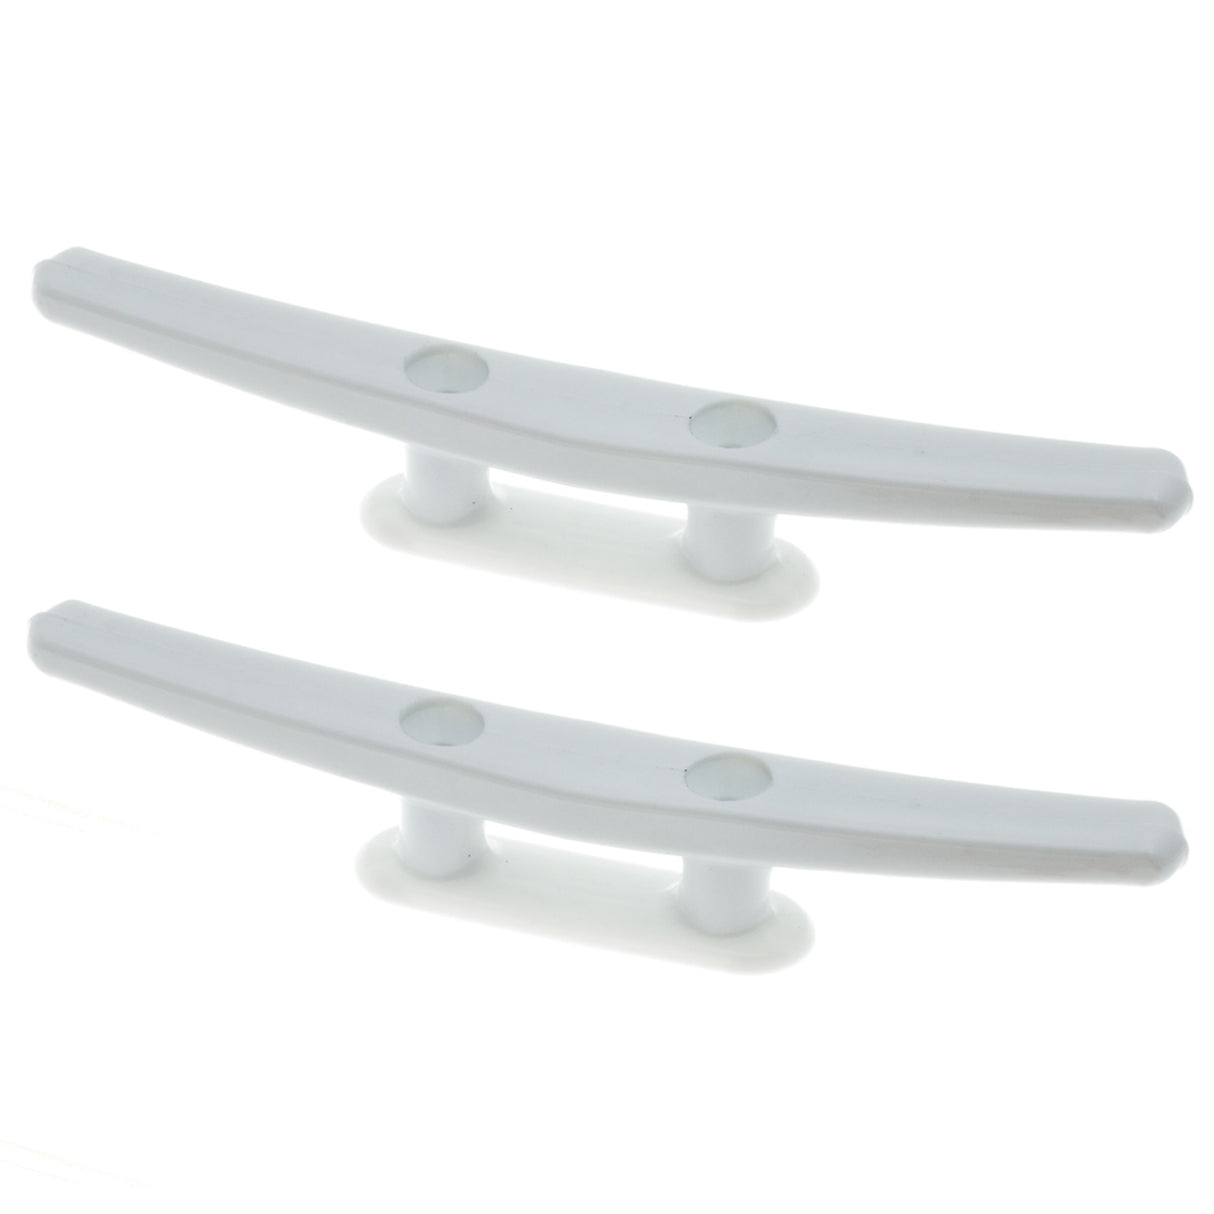 RWO Open White 215mm Horn Boat Cleat (Pack of 2)